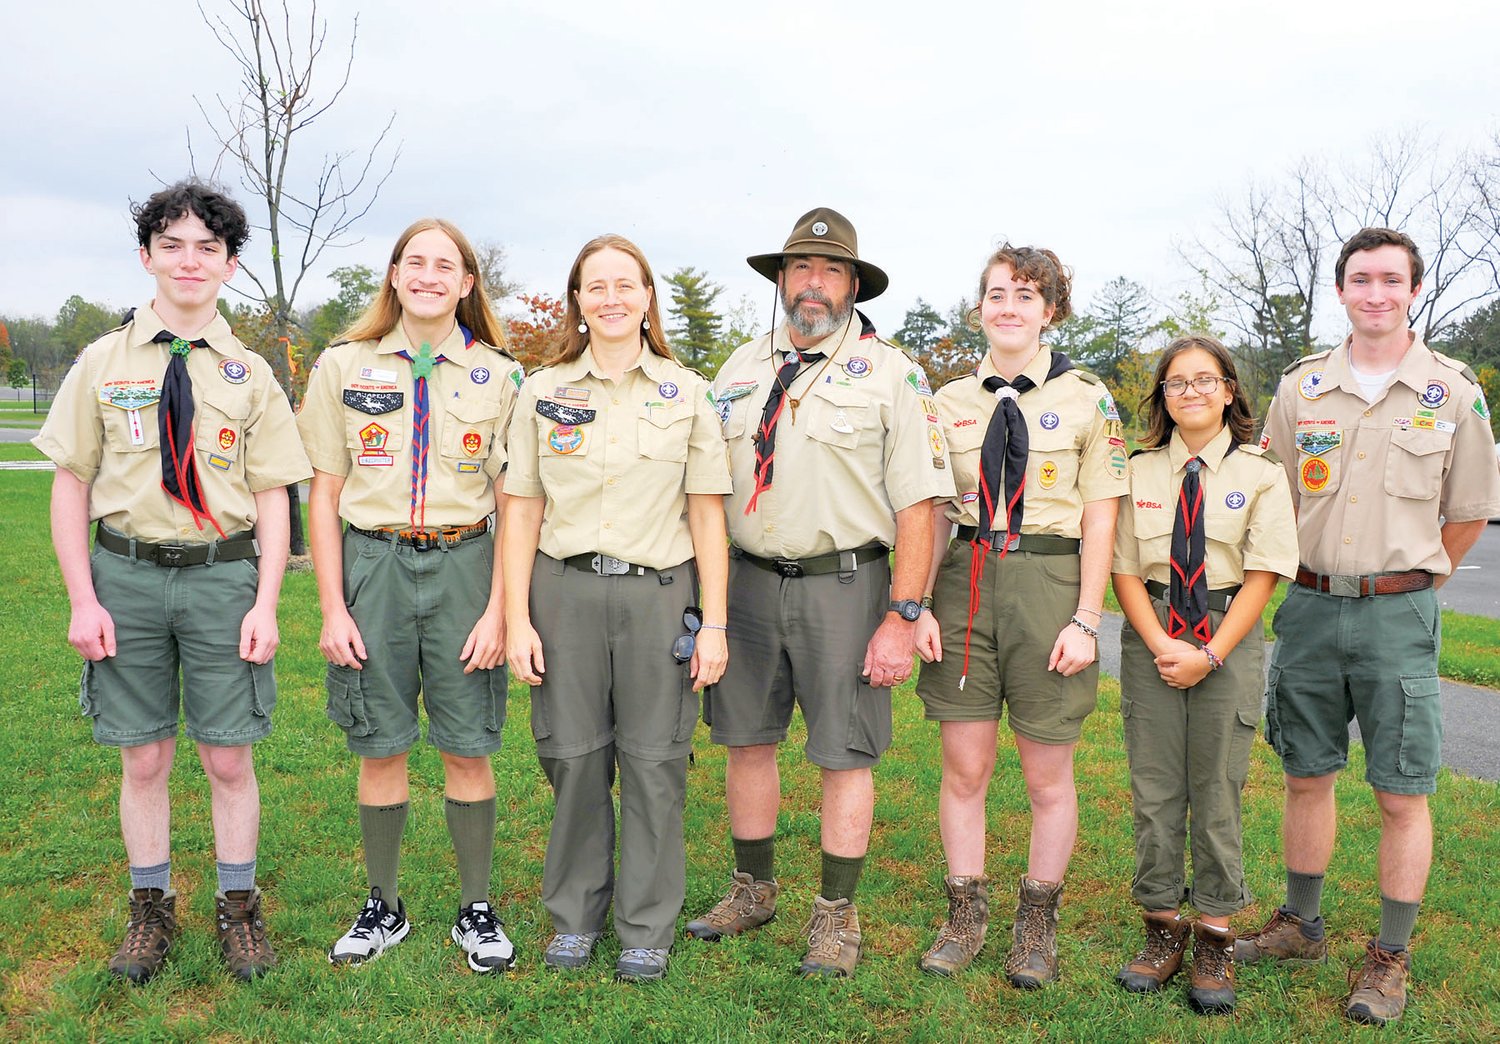 Loghan Michell, Zeke Gift, Sara Gift, Scoutmaster, Robert Michell, assistant Scoutmaster, Maria Macri, Genna Macri, Alec Oates, Boy Scouts of America from Troops 169B, 169G, 172 and 71.